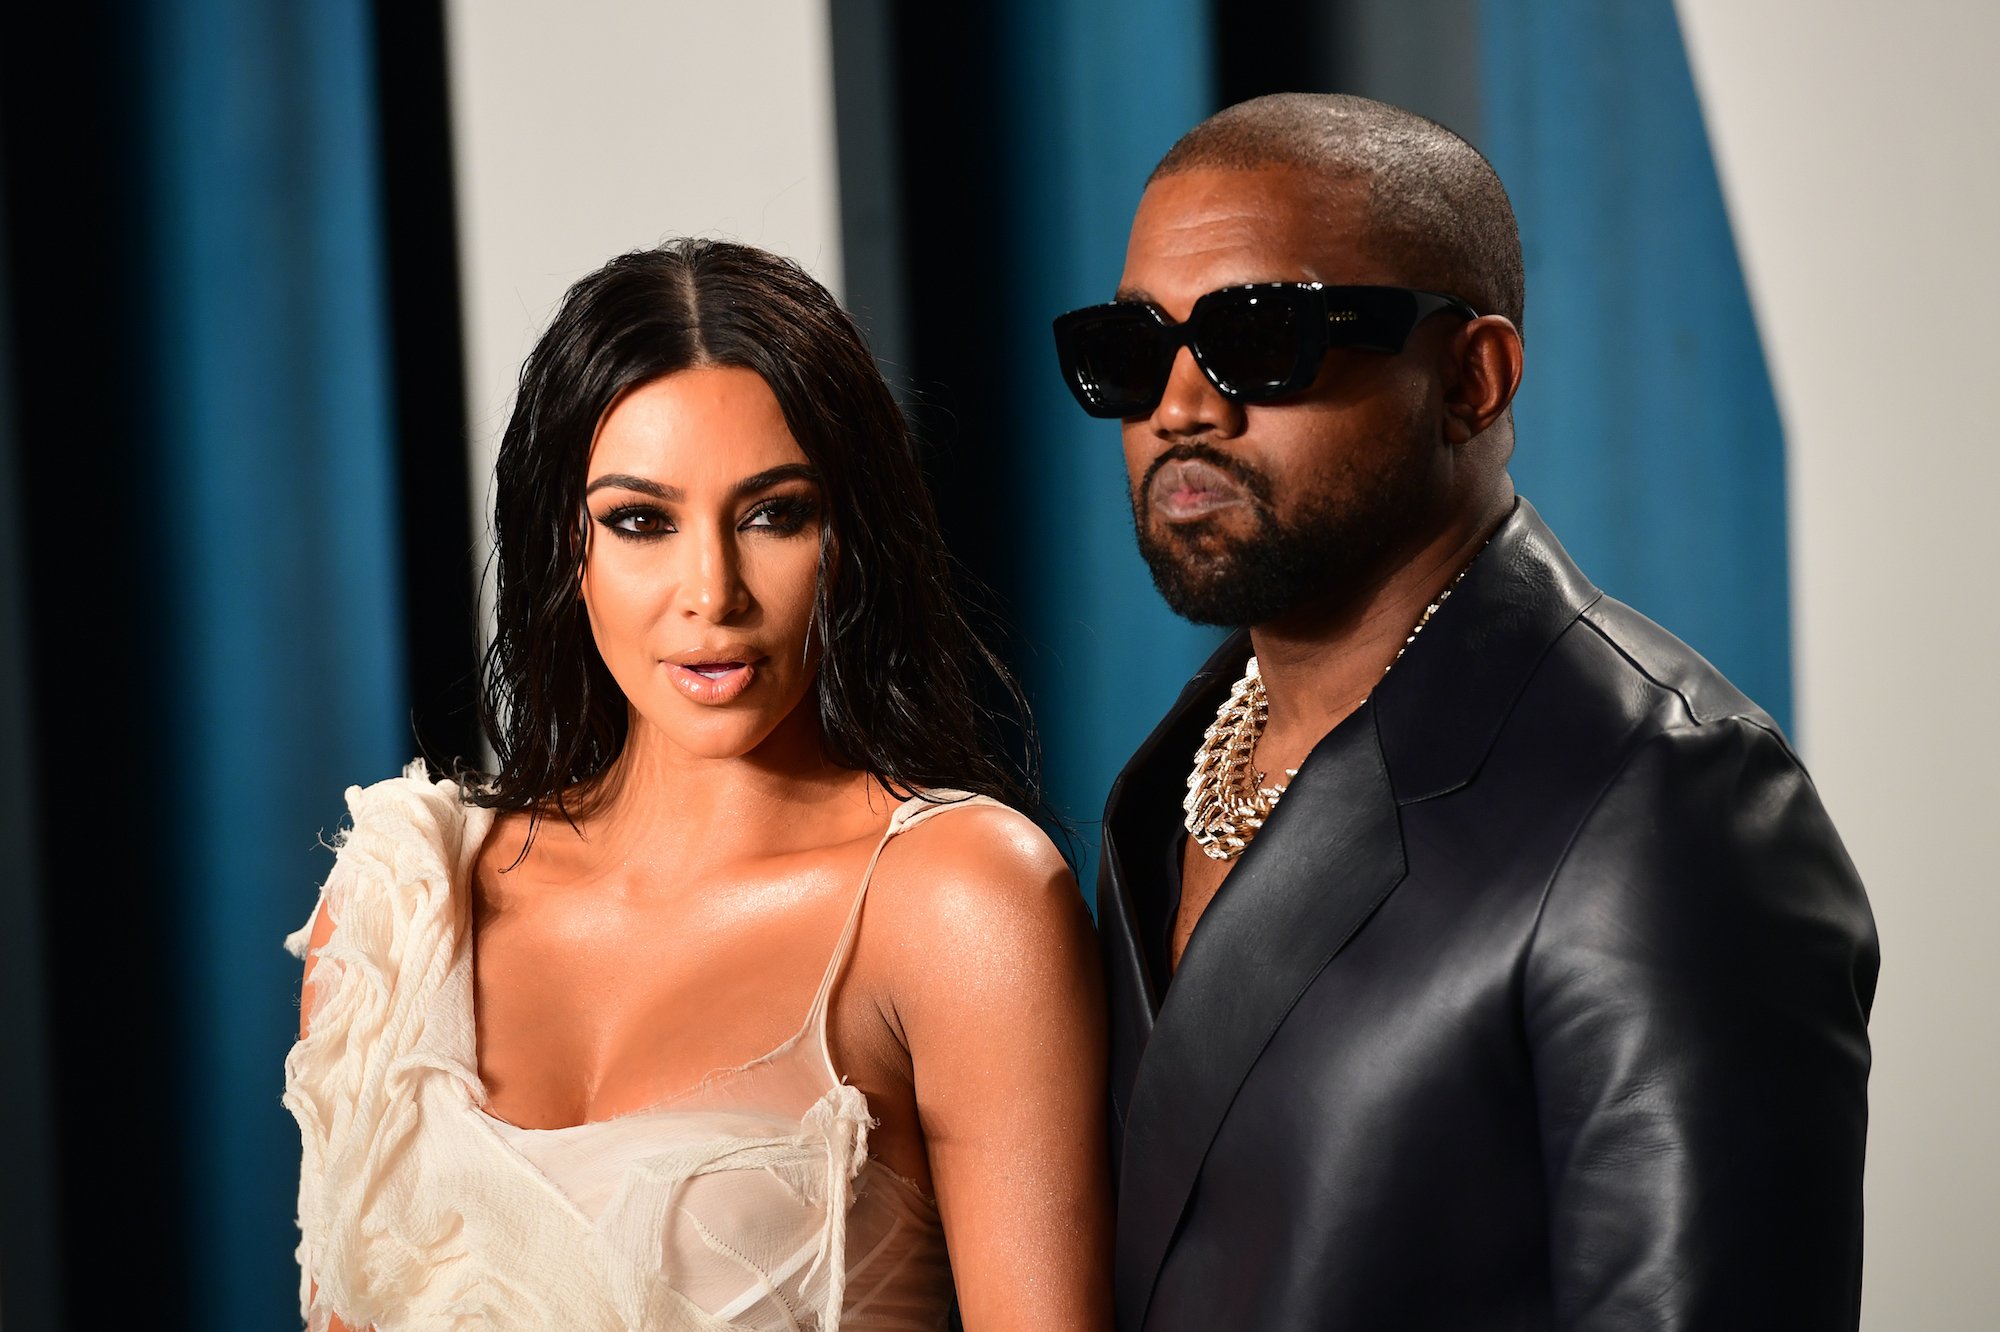 Kim Kardashian West and Kanye West stand together on the red carpet